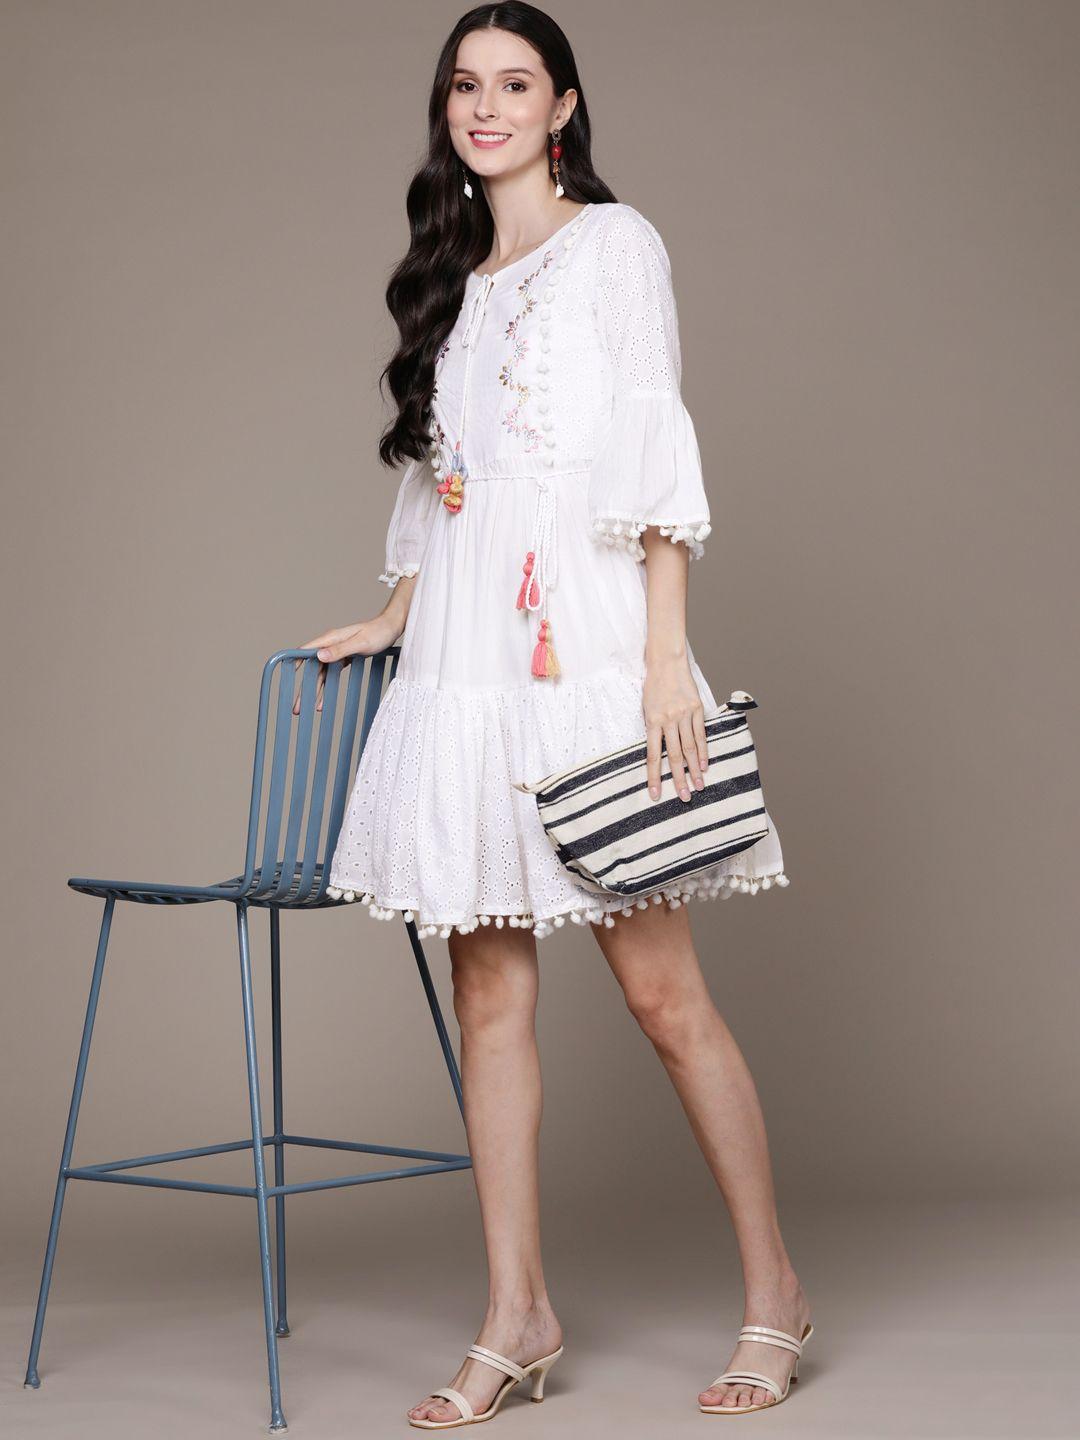 ishin-white-floral-embroidered-tie-up-neck-a-line-dress